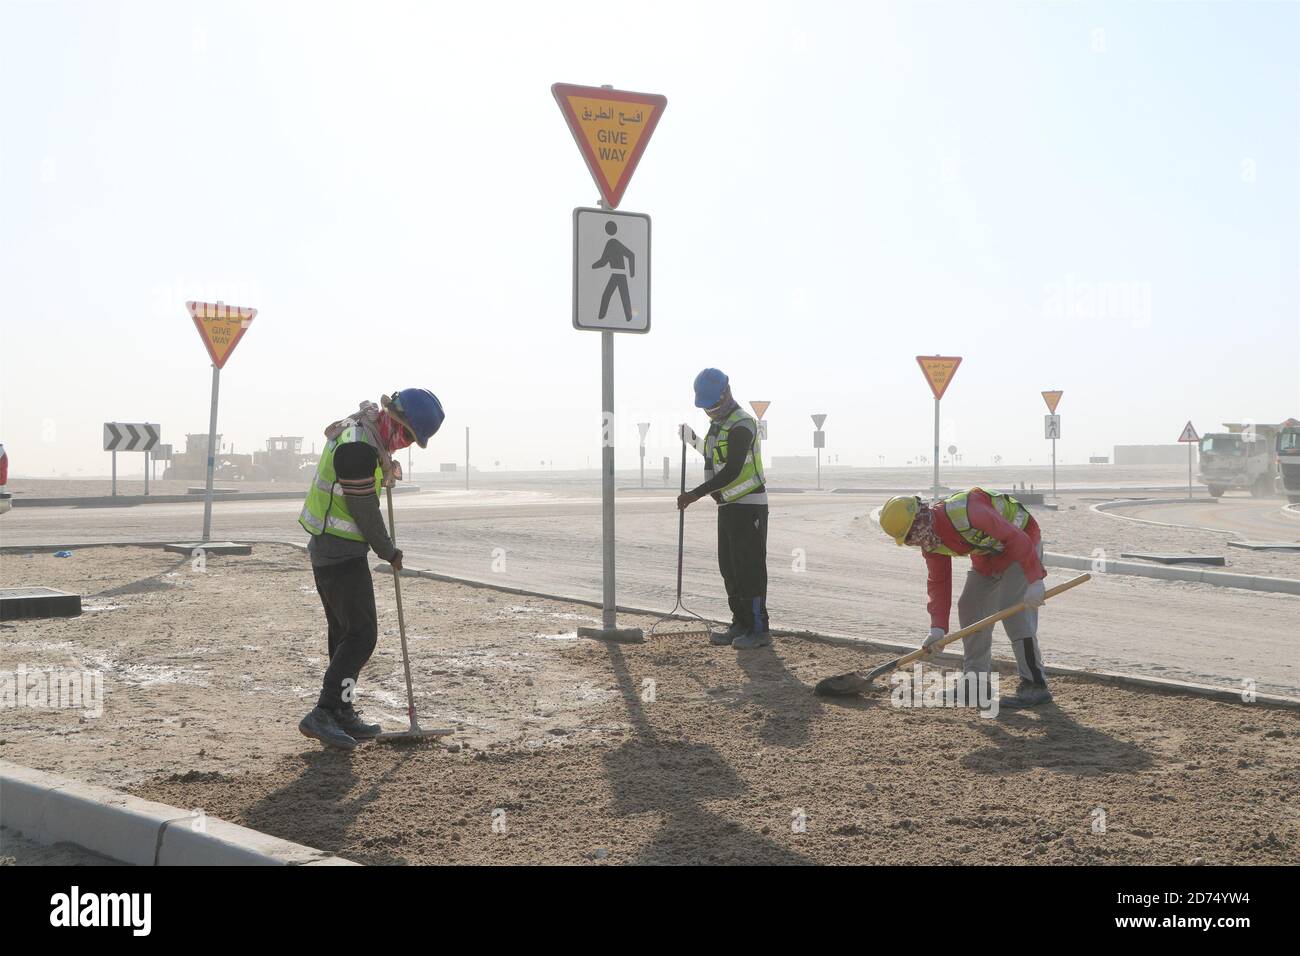 Jahra Governorate, Kuwait. 18th Oct, 2020. Staff members work at the construction site of a project of China Gezhouba Group Corporation (CGGC) in desert of Jahra Governorate, Kuwait, Oct. 18, 2020. China Gezhouba Group Corporation (CGGC) handed over on Tuesday the first batch of its housing infrastructure project to the Kuwaiti side, injecting new momentum into Kuwait's economy and livelihood. Credit: Liu Lianghaoyue/Xinhua/Alamy Live News Stock Photo